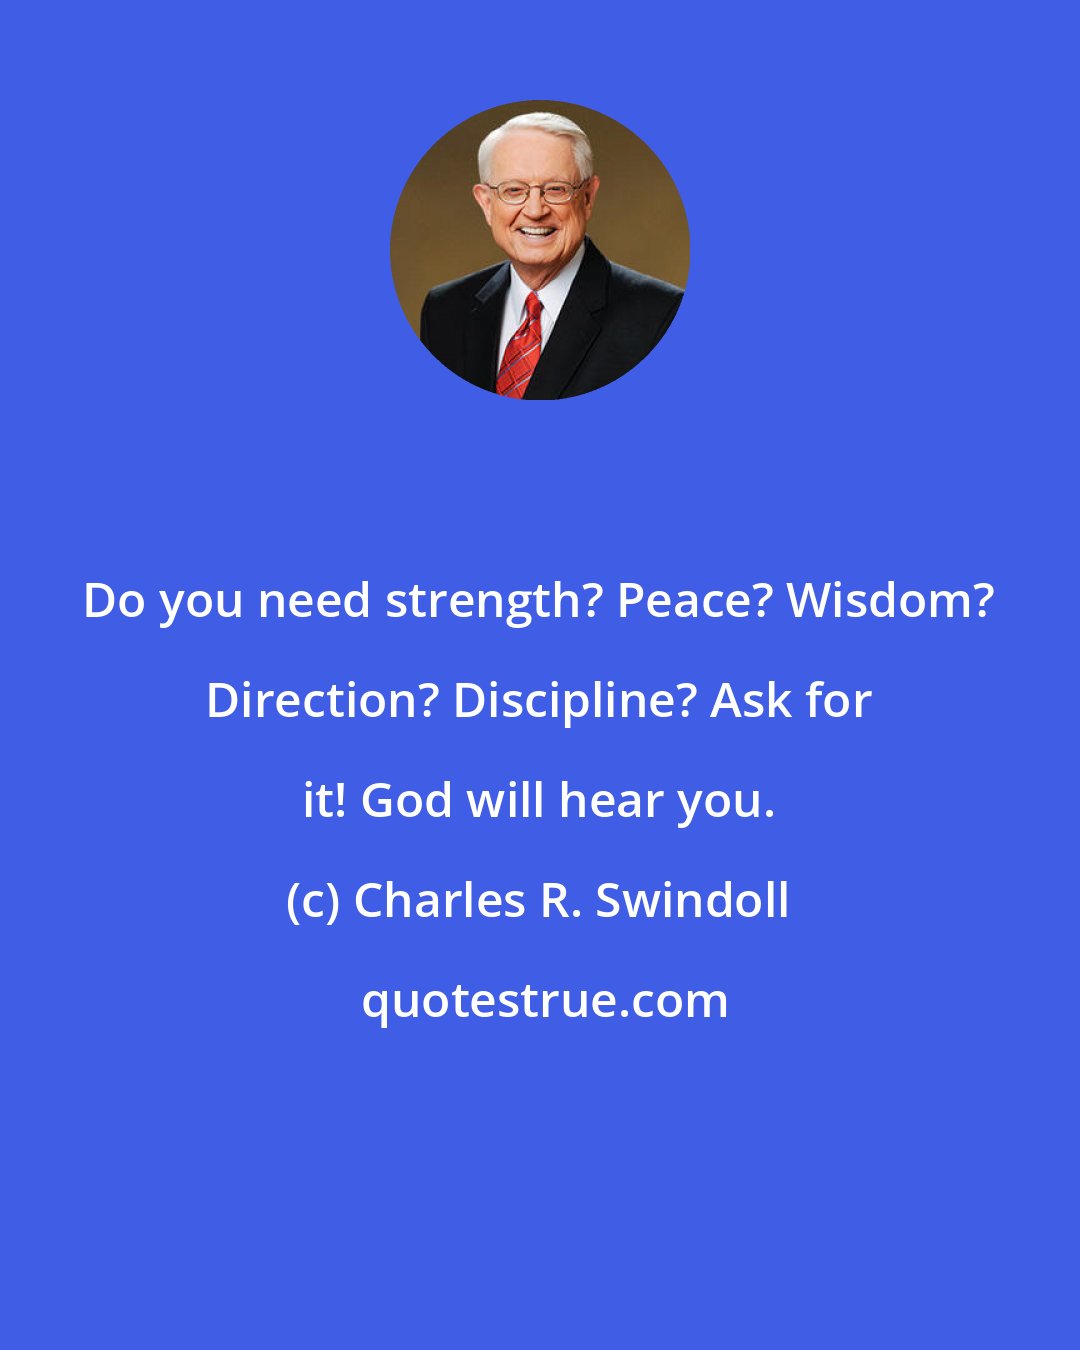 Charles R. Swindoll: Do you need strength? Peace? Wisdom? Direction? Discipline? Ask for it! God will hear you.